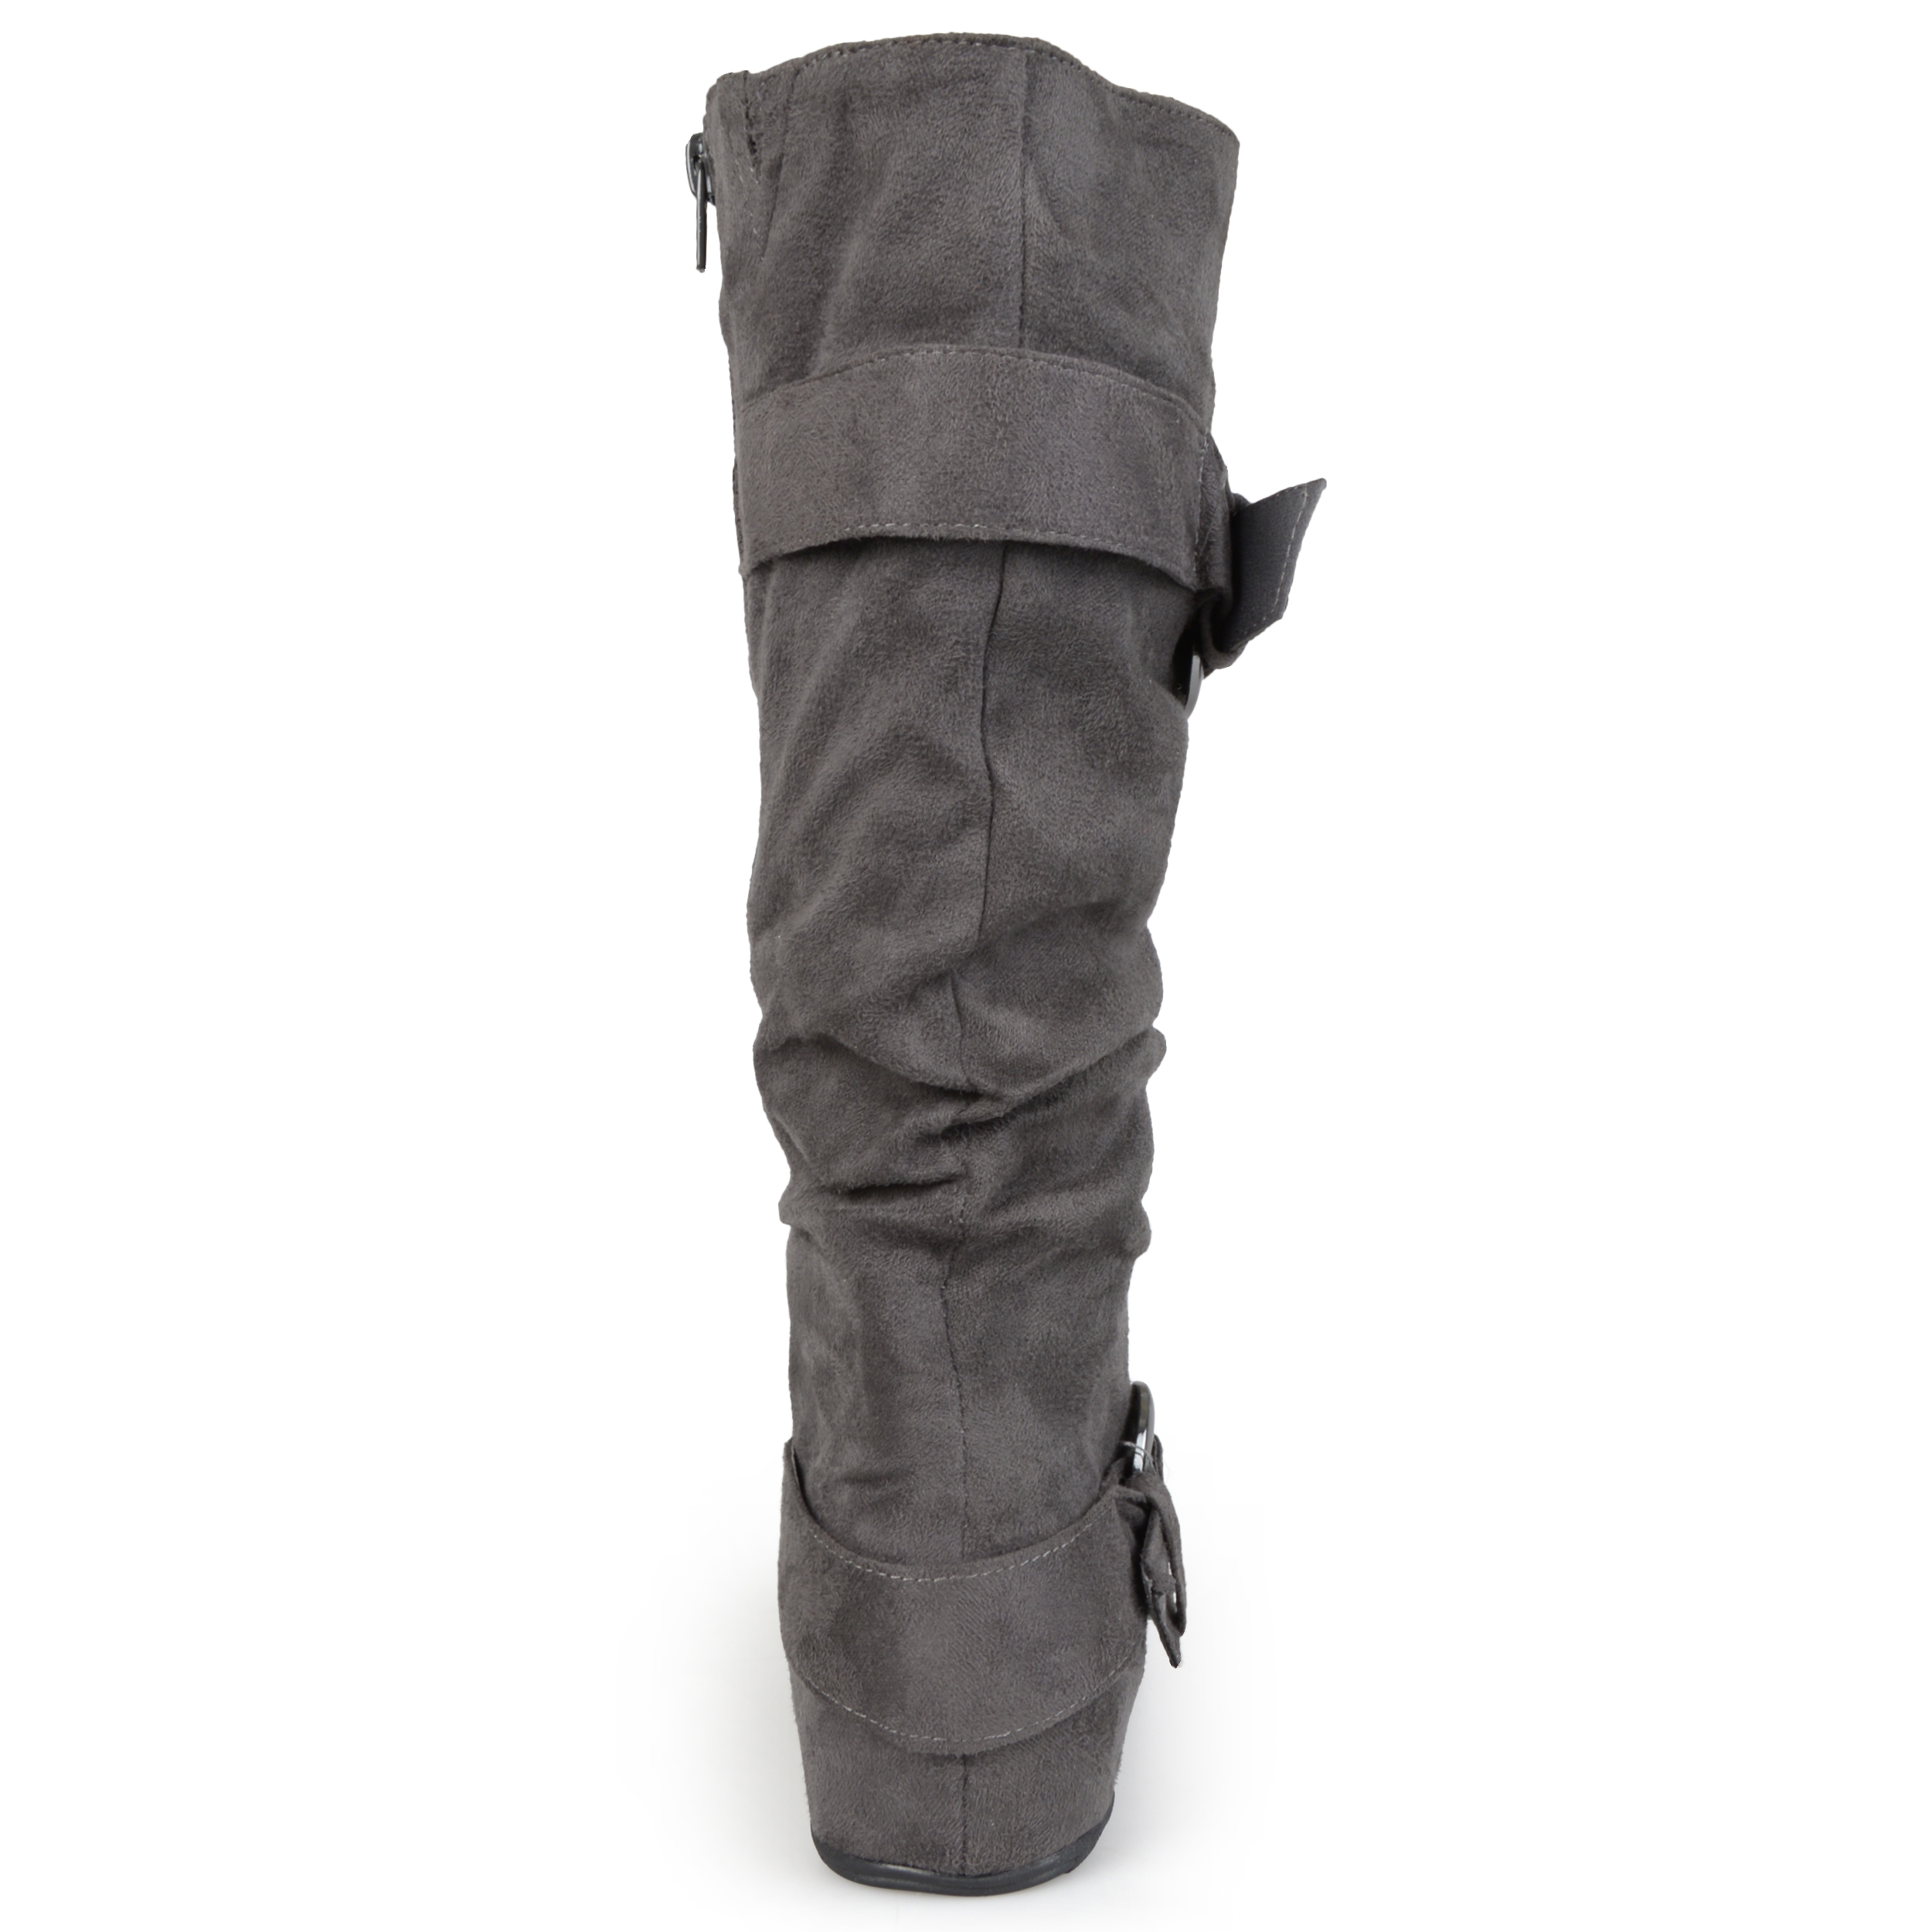 Women's Slouchy Wide Calf Boots - image 4 of 8